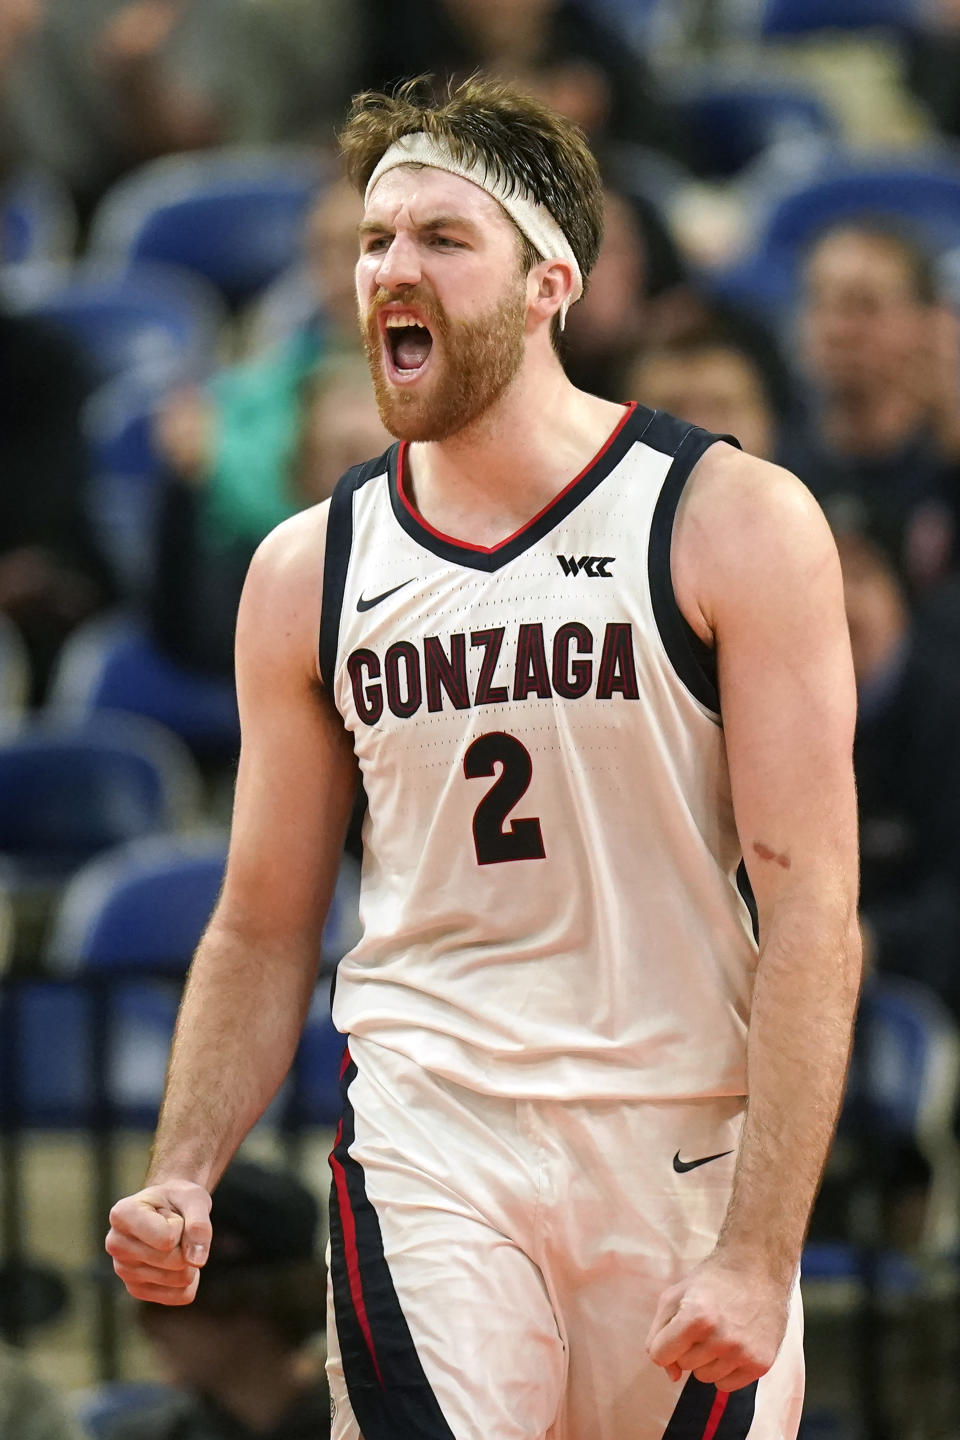 Gonzaga forward Drew Timme reacts after scoring against Xavier during the second half of an NCAA college basketball game in the Phil Knight Legacy tournament Sunday, Nov. 27, 2022, in Portland, Ore. (AP Photo/Rick Bowmer)